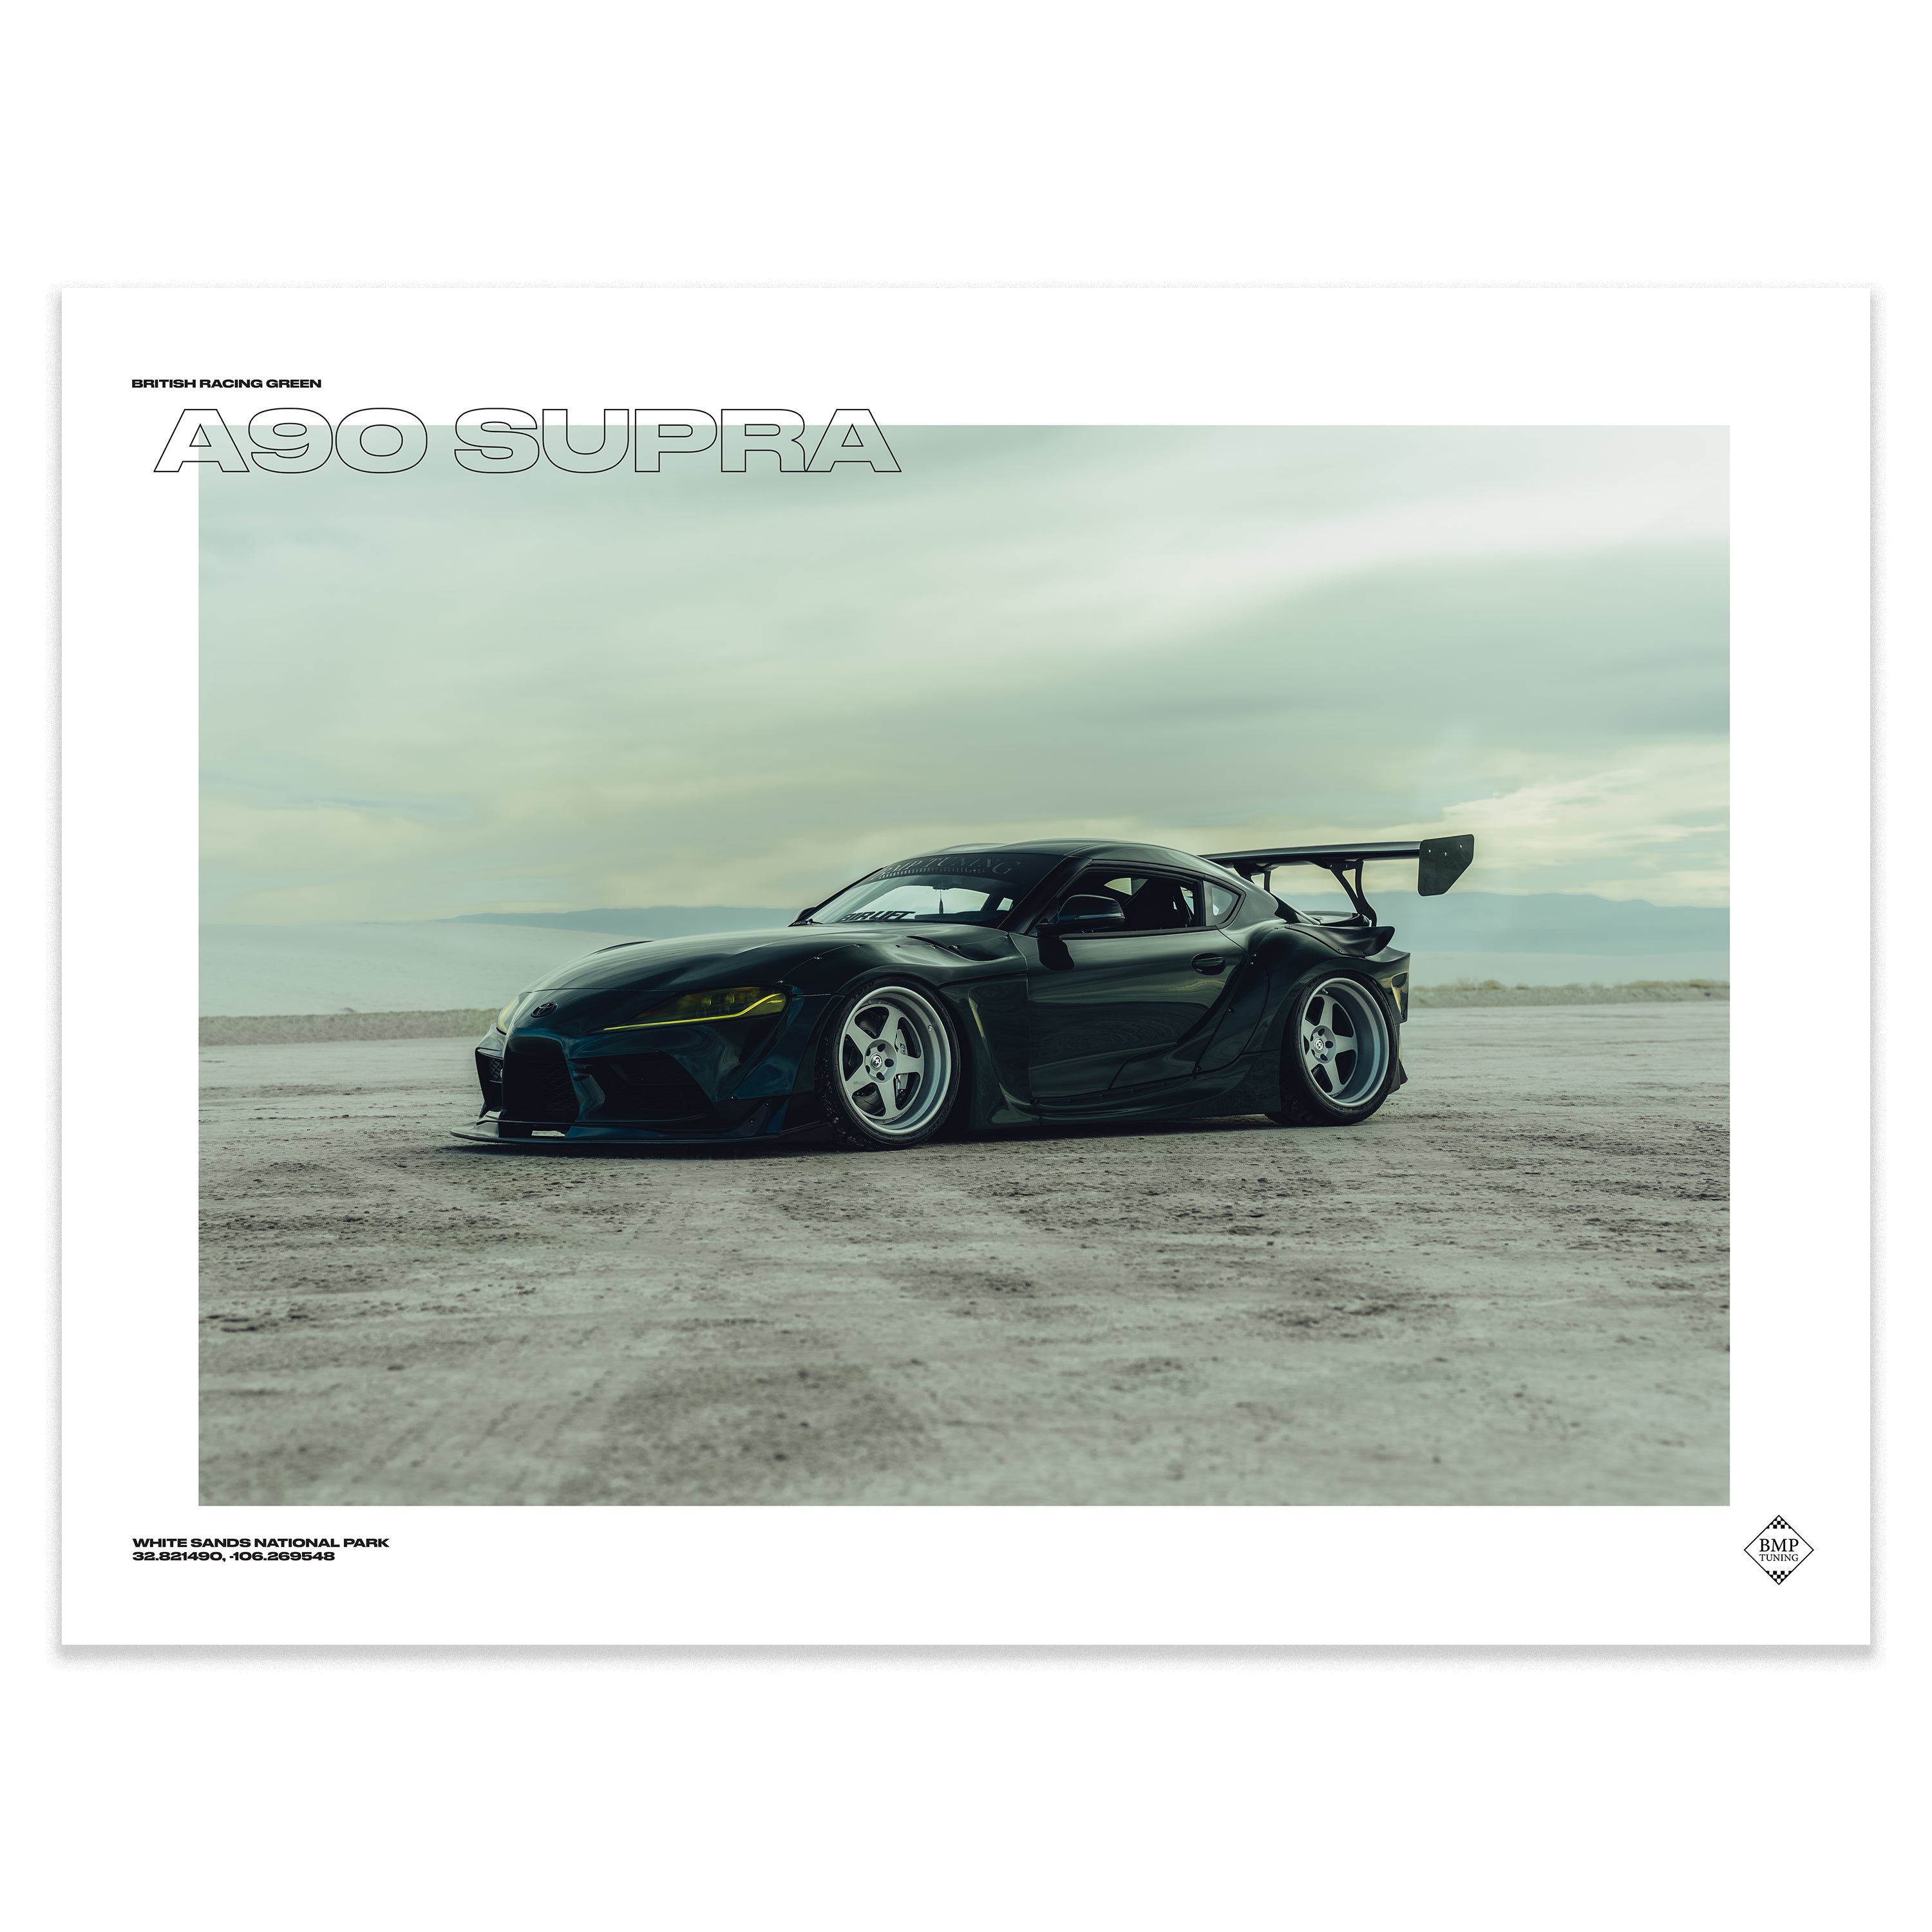 BMP Tuning G80 M3 and A90 Supra Poster Bundle (18"x24")